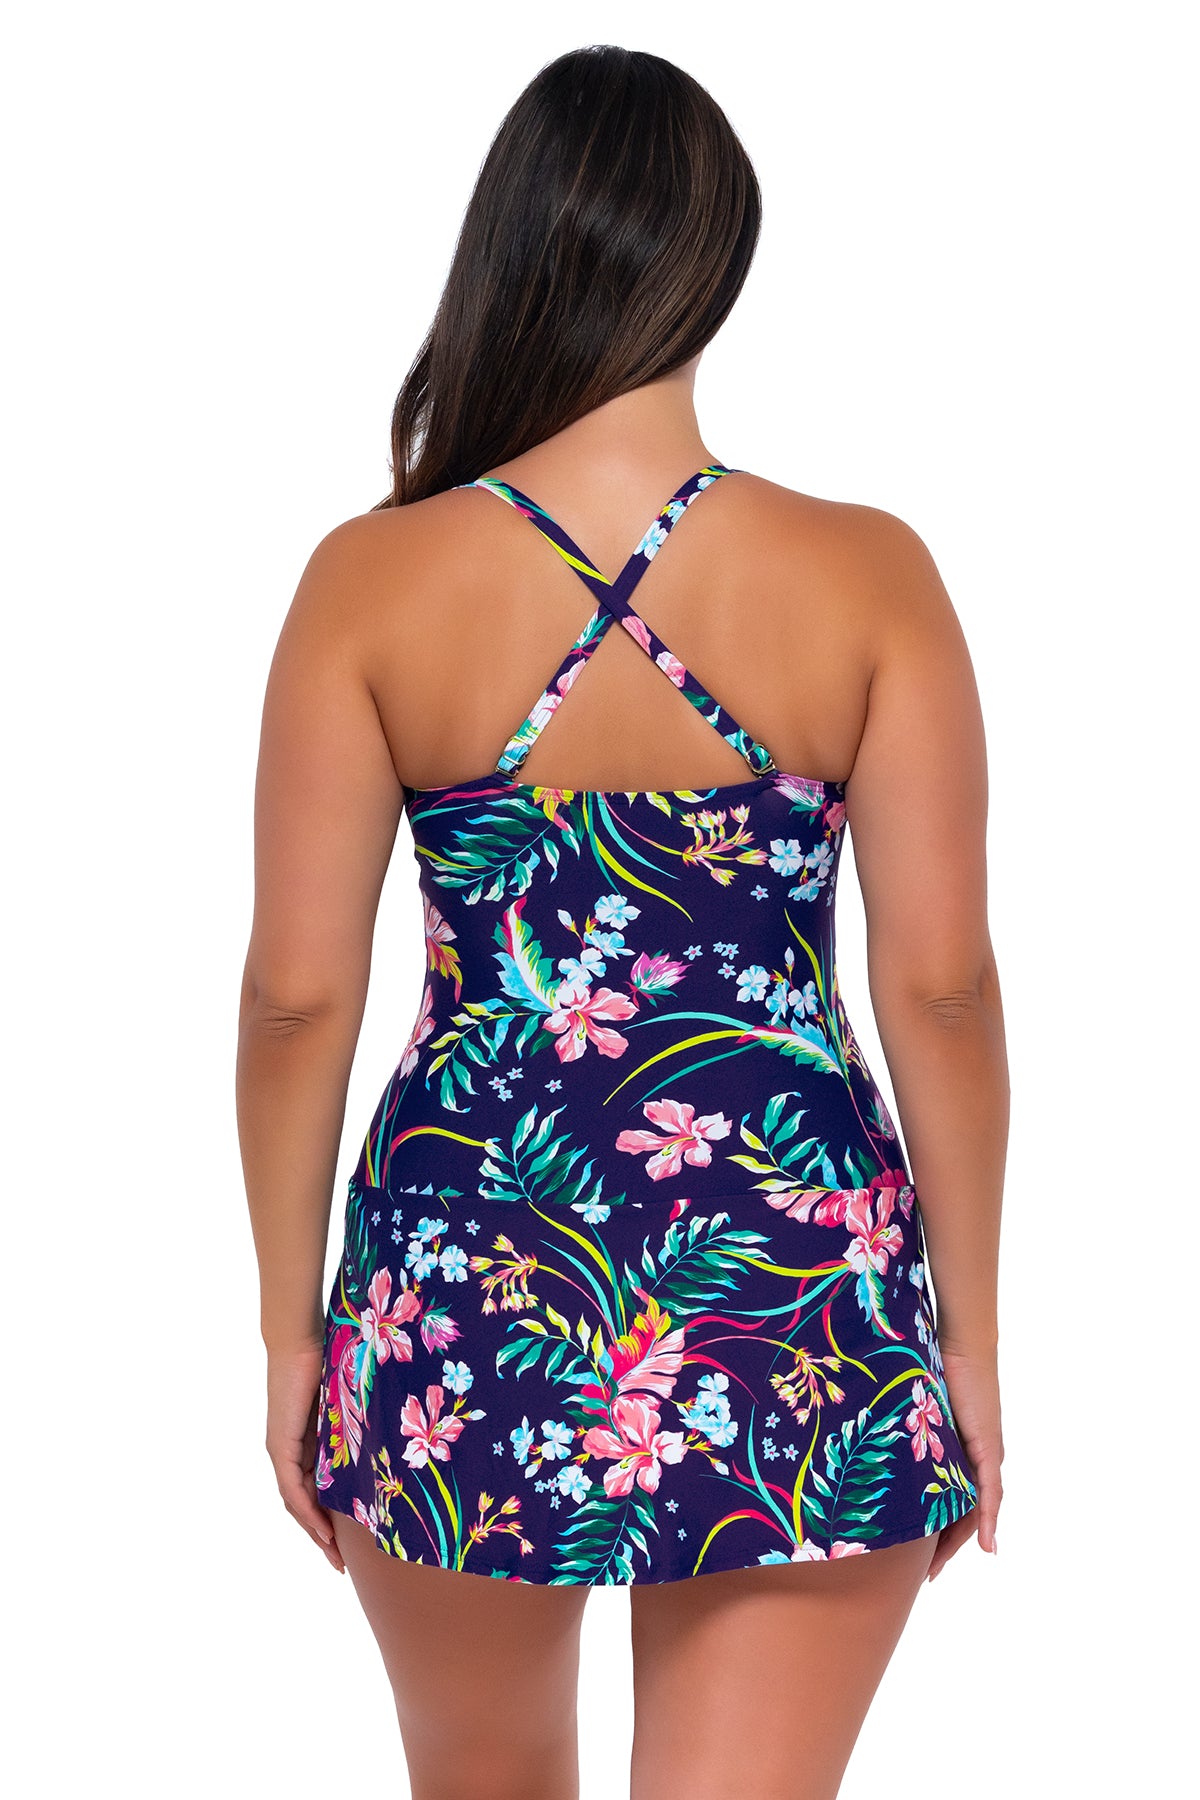 Back pose #1 of Nicky wearing Sunsets Escape Island Getaway Sienna Swim Dress showing crossback straps